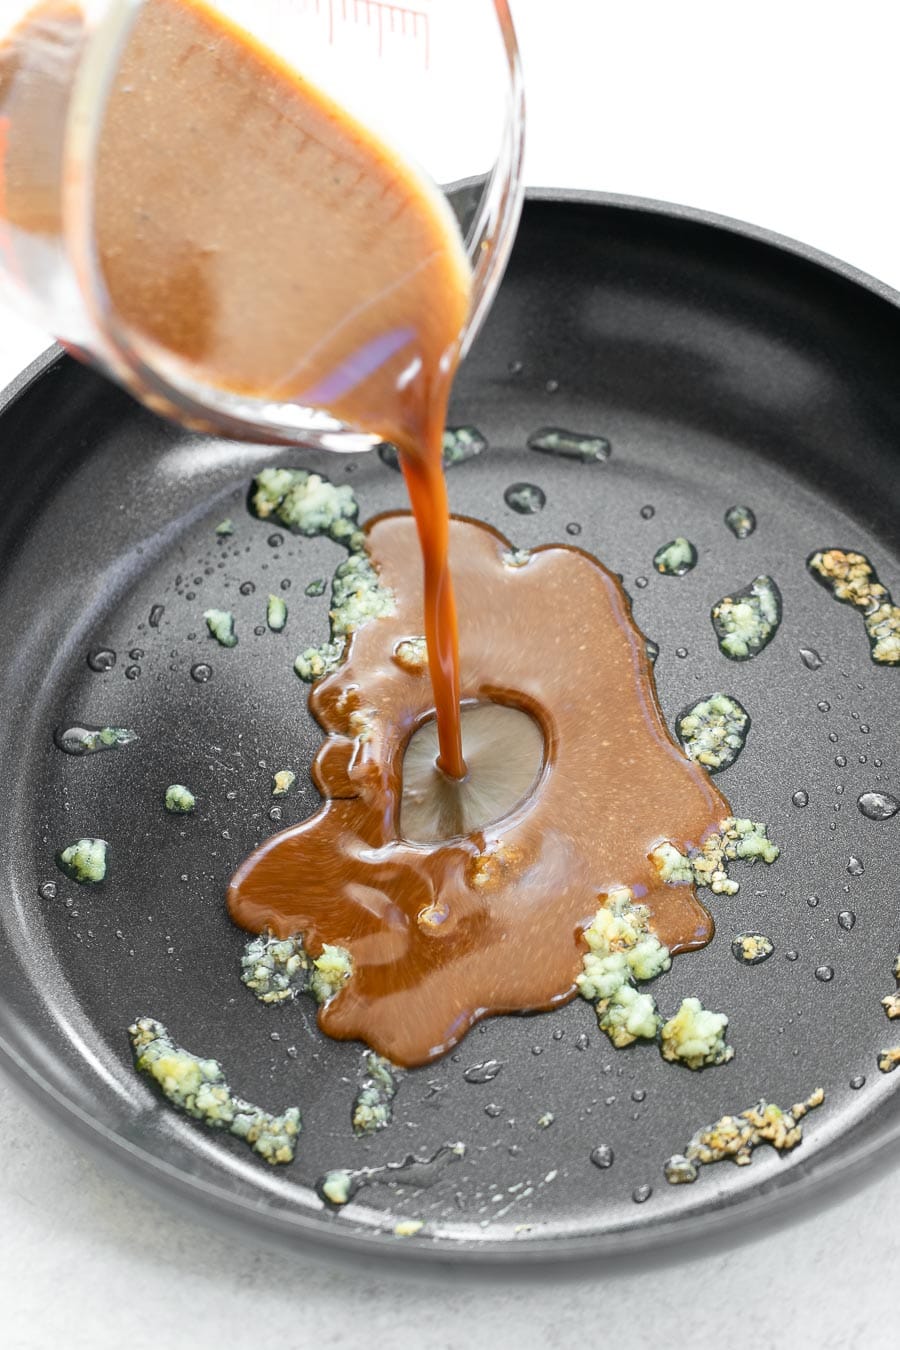 Pouring the sesame sauce into a pan with garlic.